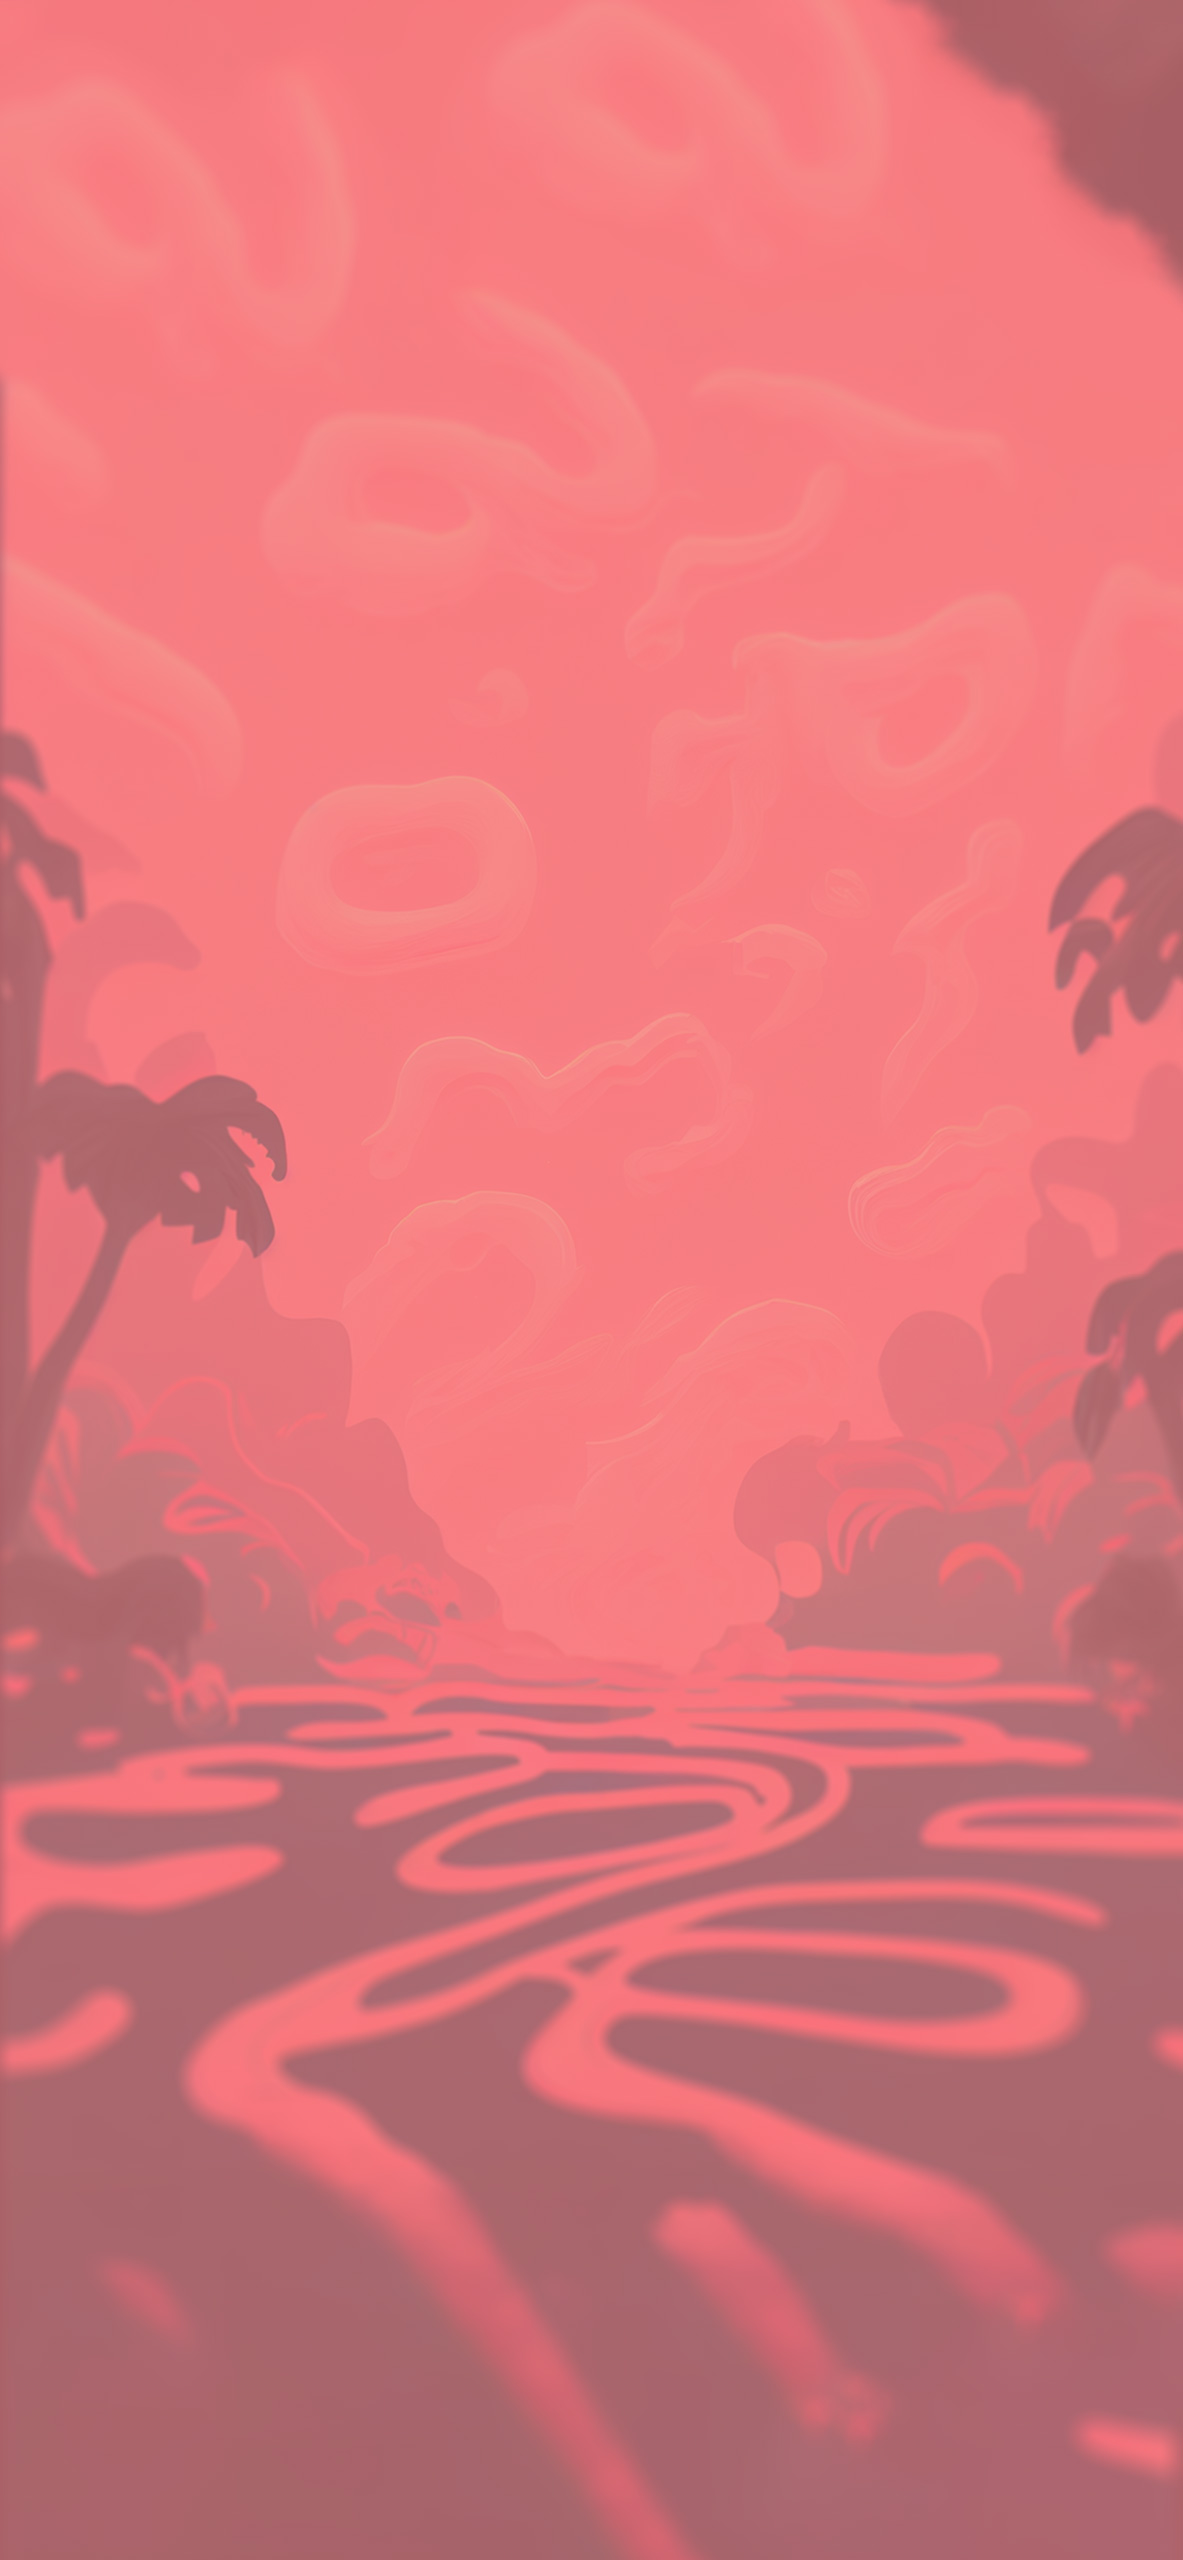 river flow aesthetic pink background